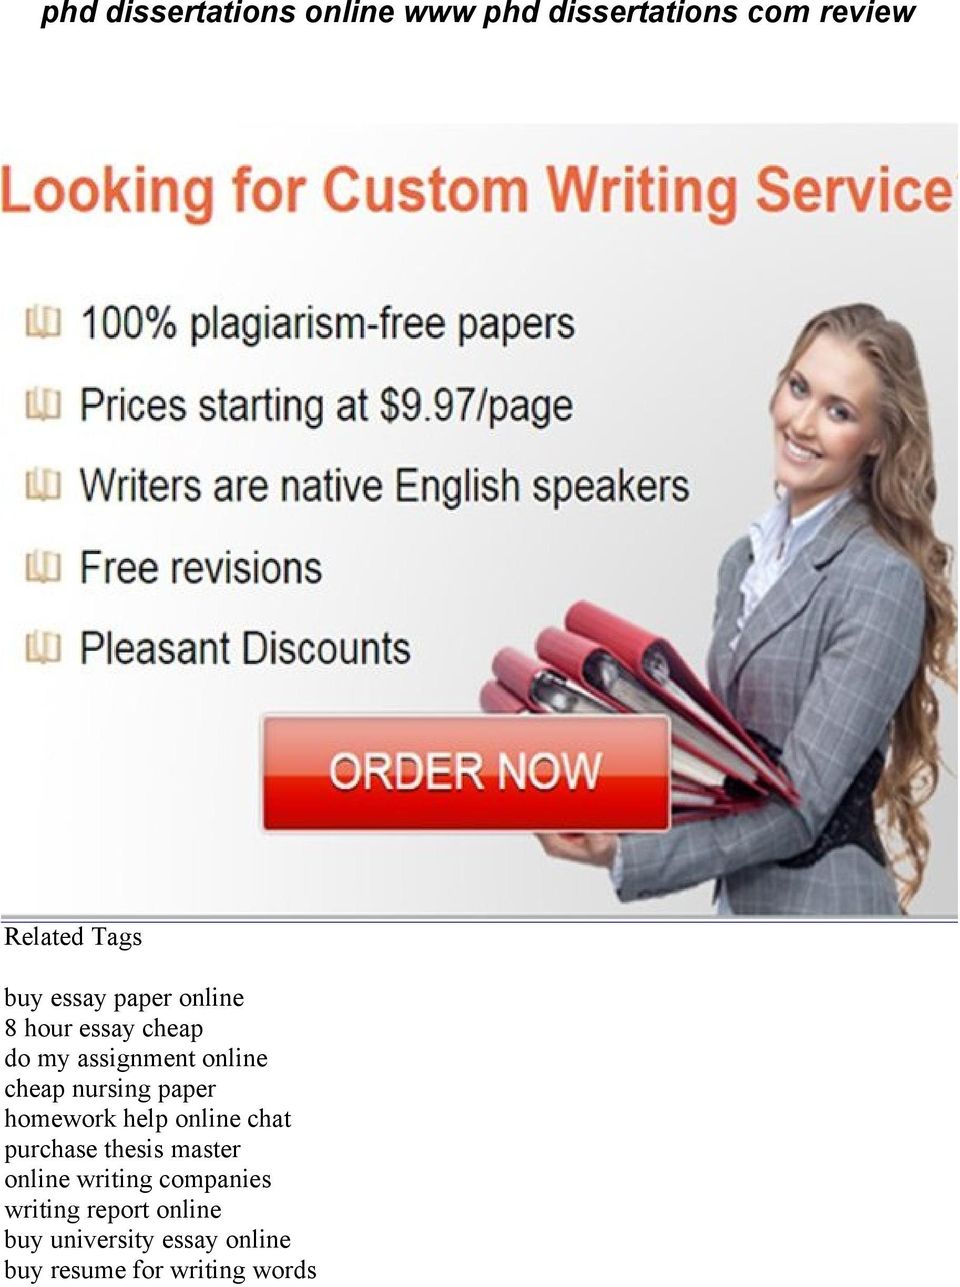 paper homework help online chat purchase thesis master online writing